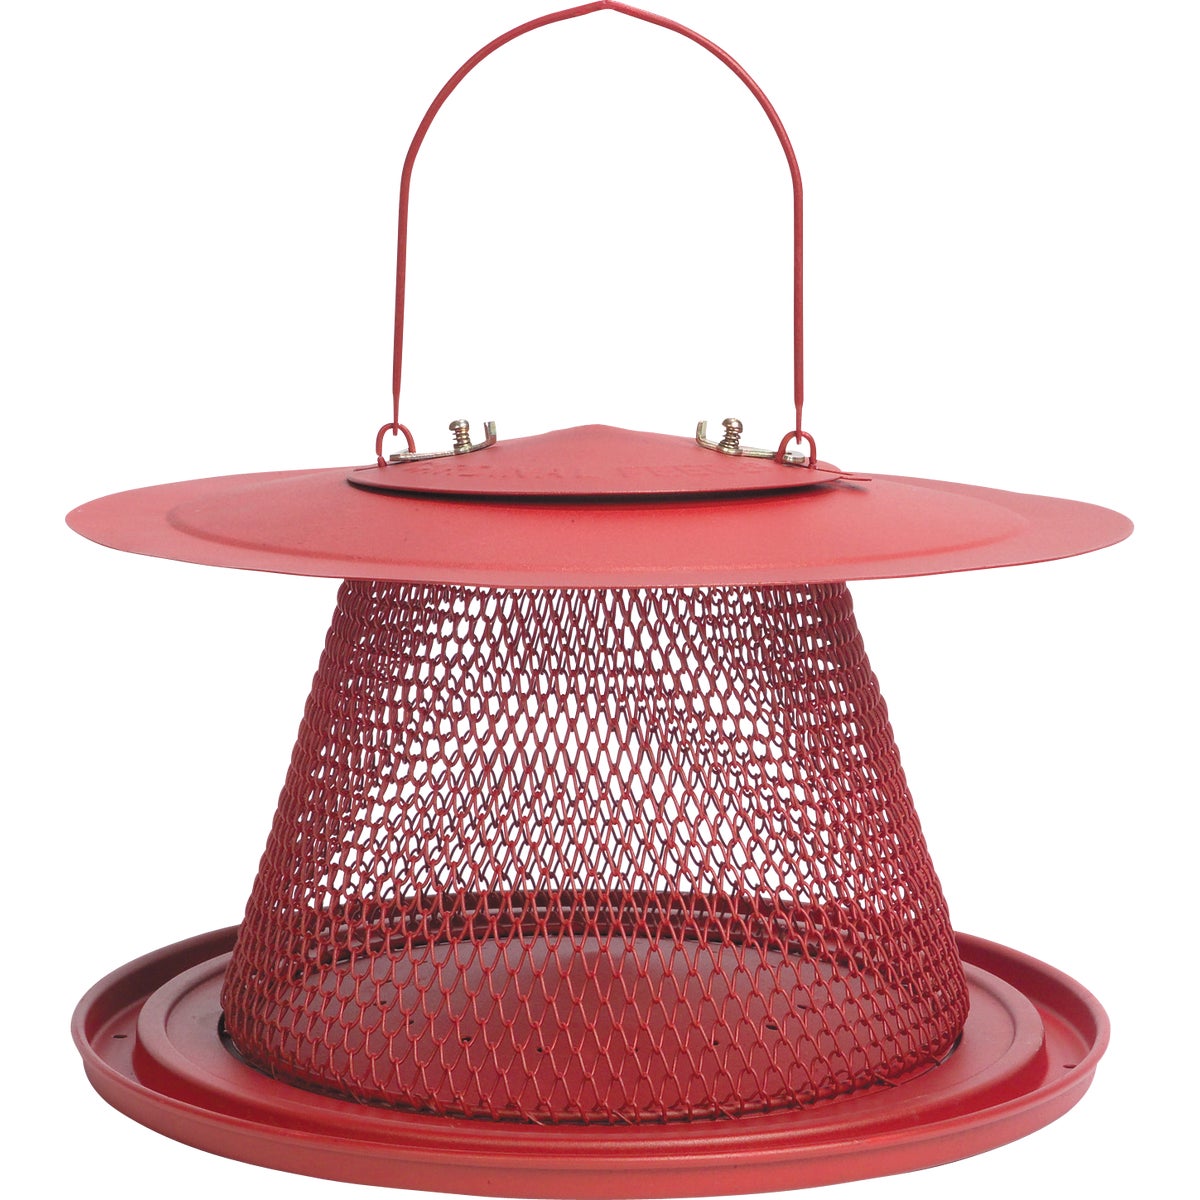 Item 703078, All metal mesh feeder provides a large feeding area for clinging and 